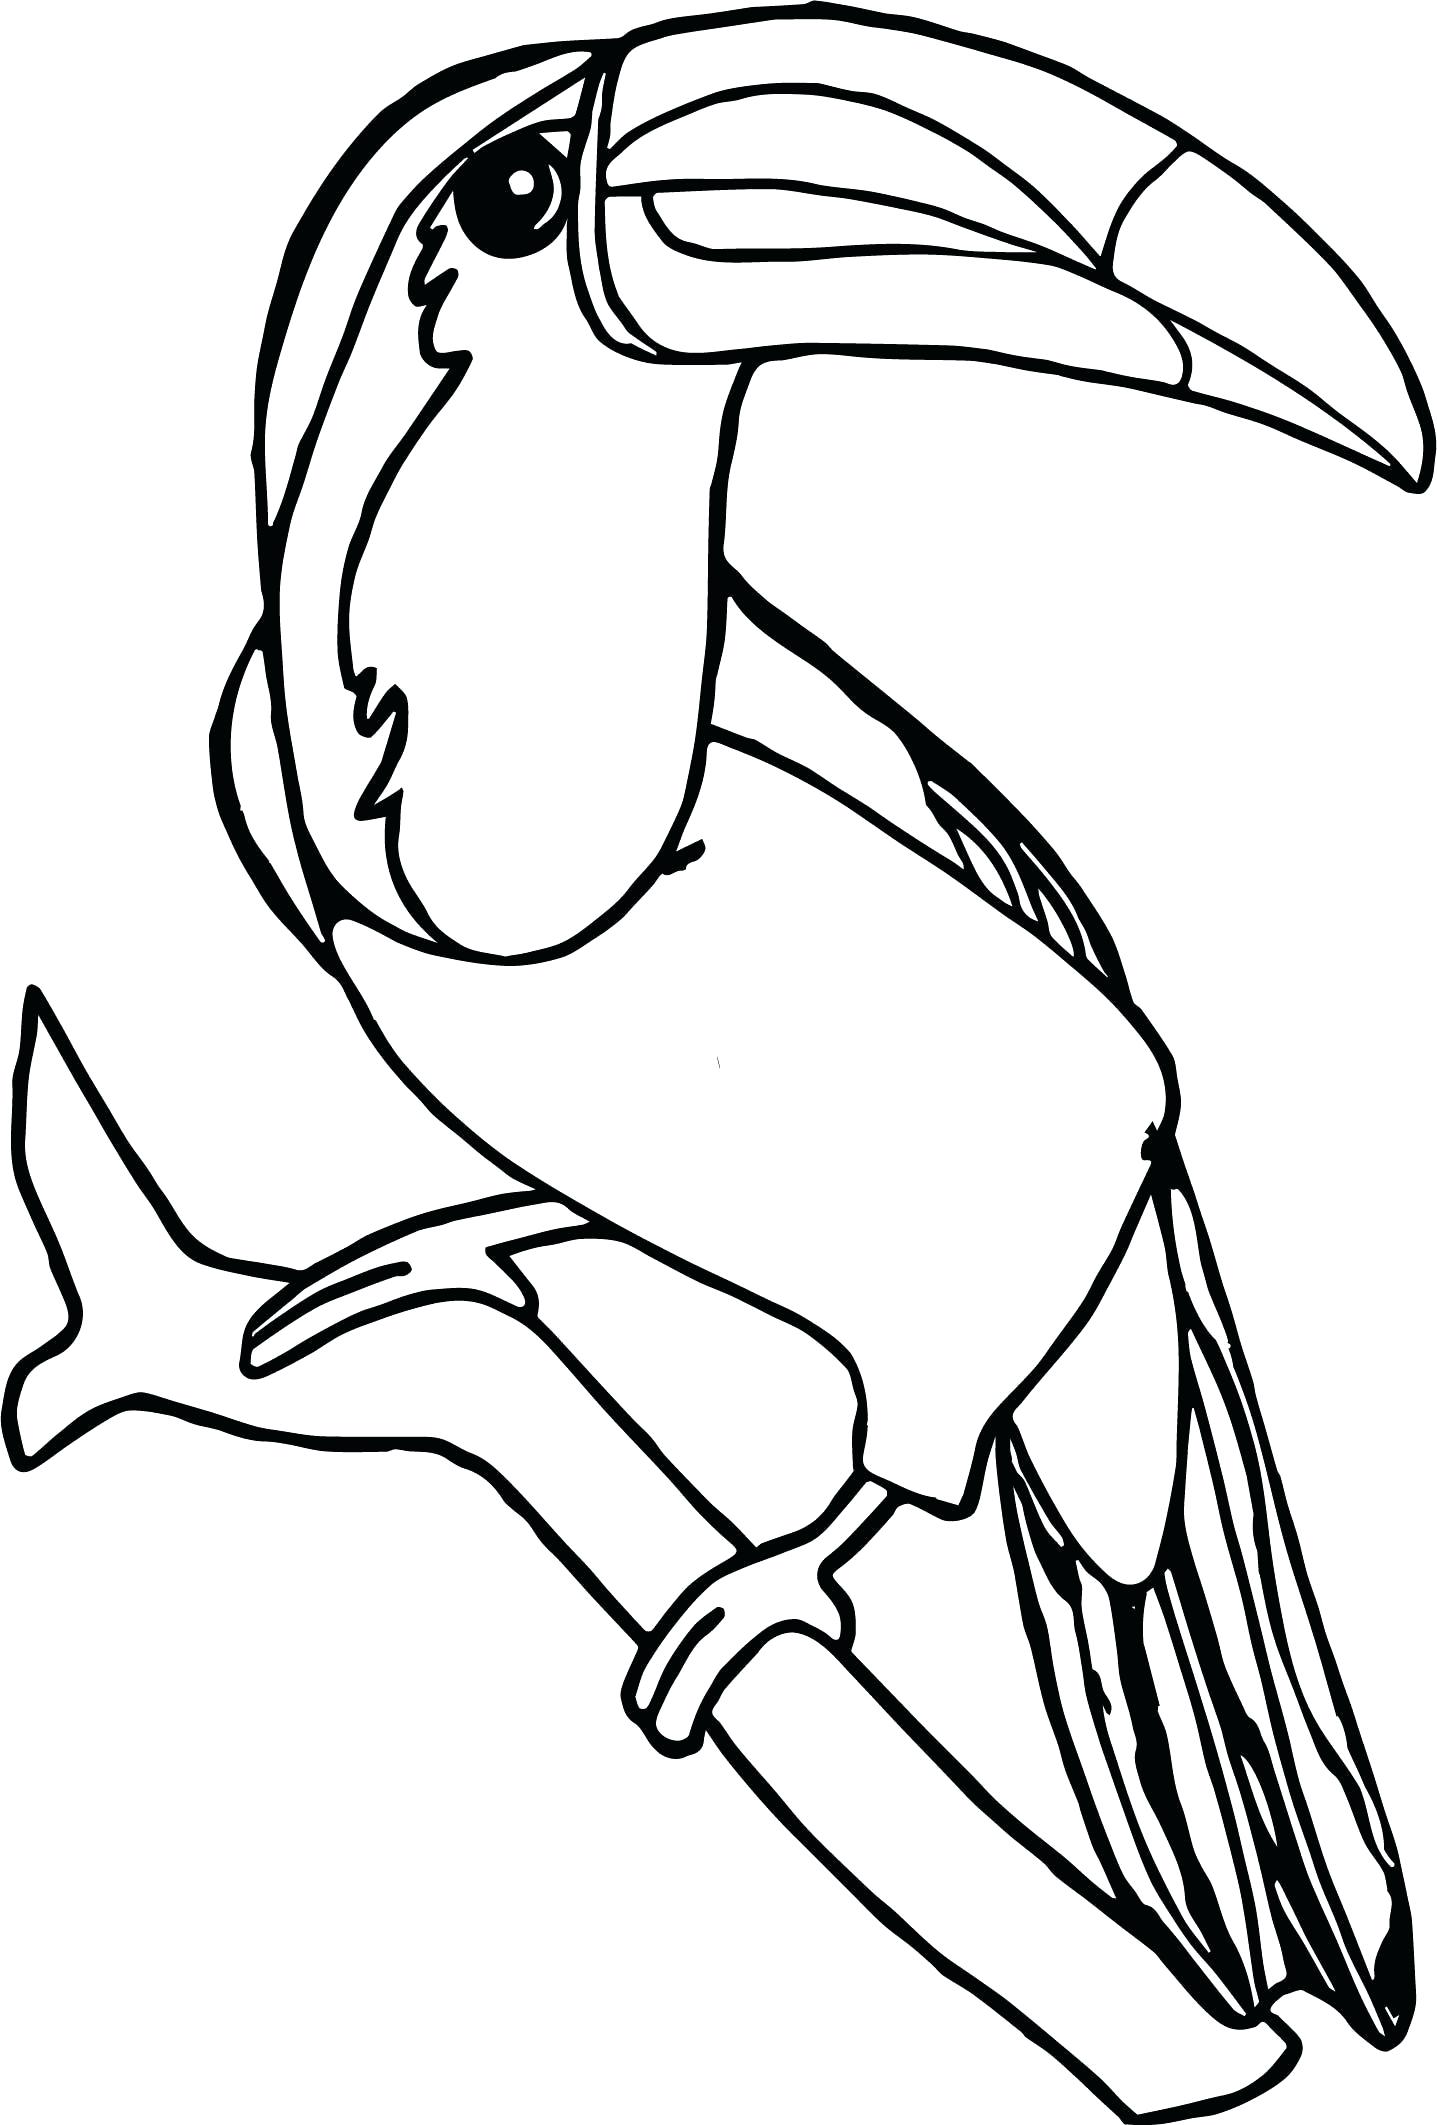 Toucan Coloring Pages Best Coloring Pages For Kids